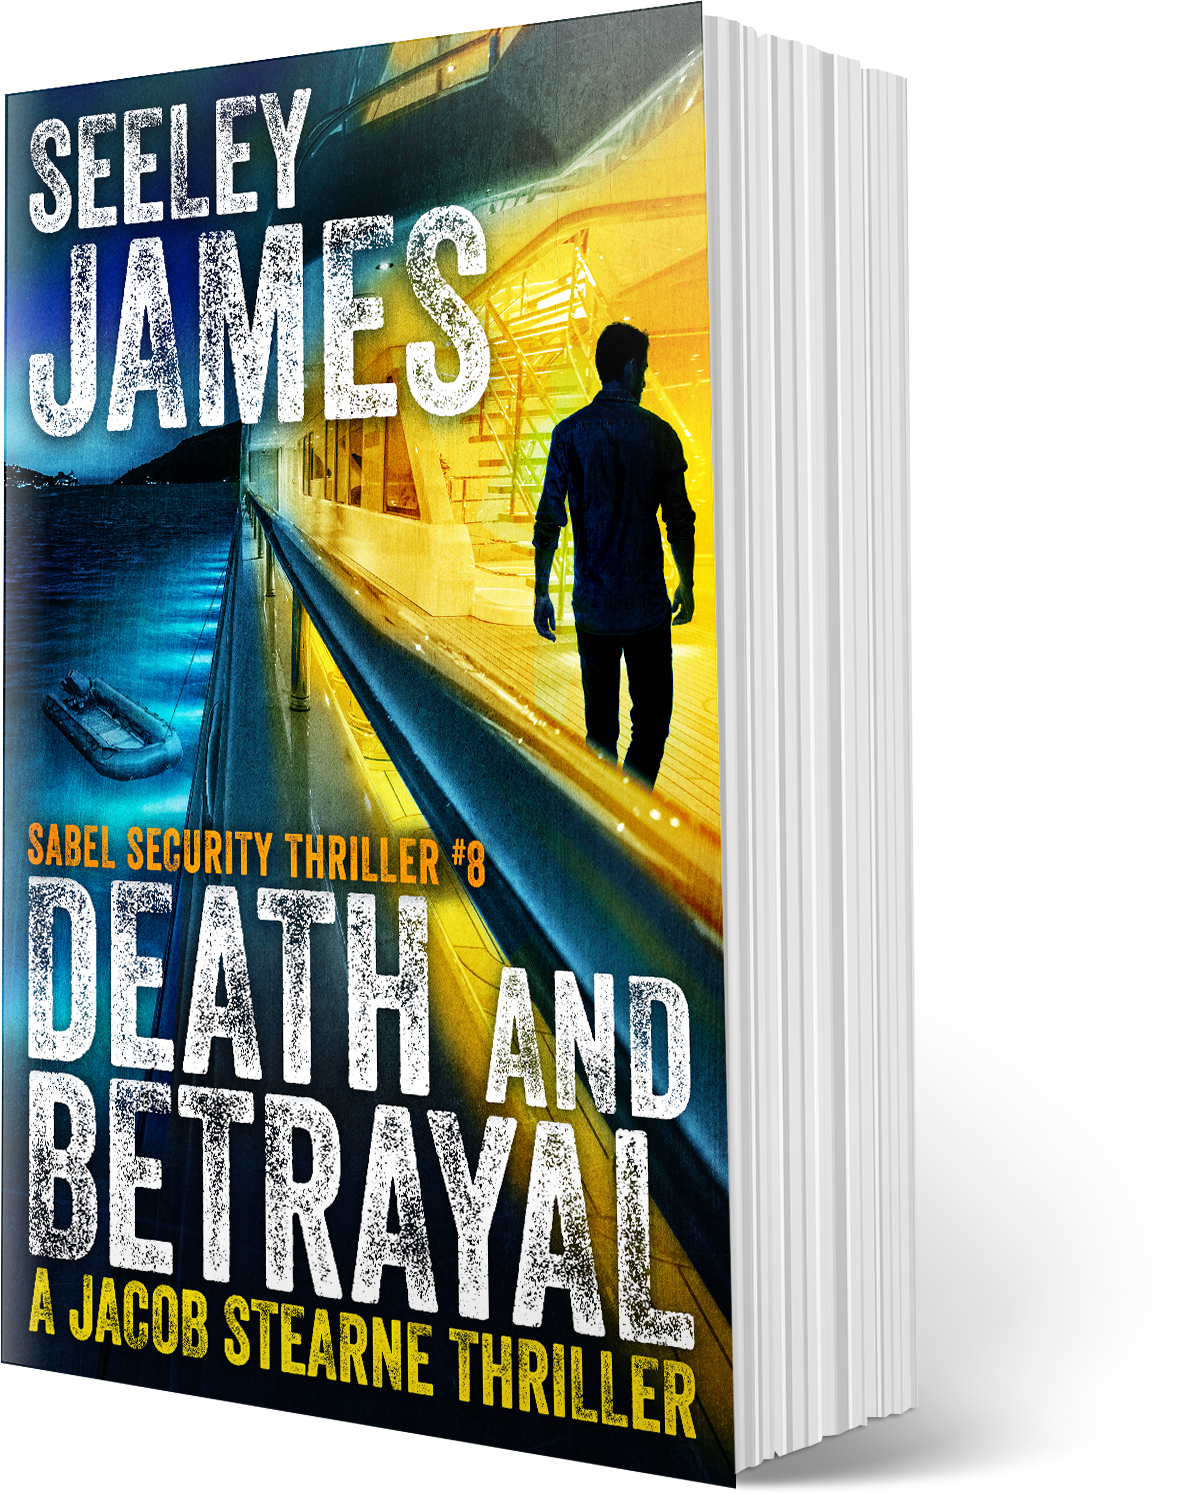 Death and Betrayal: A Jacob Stearne Thriller - Softcover